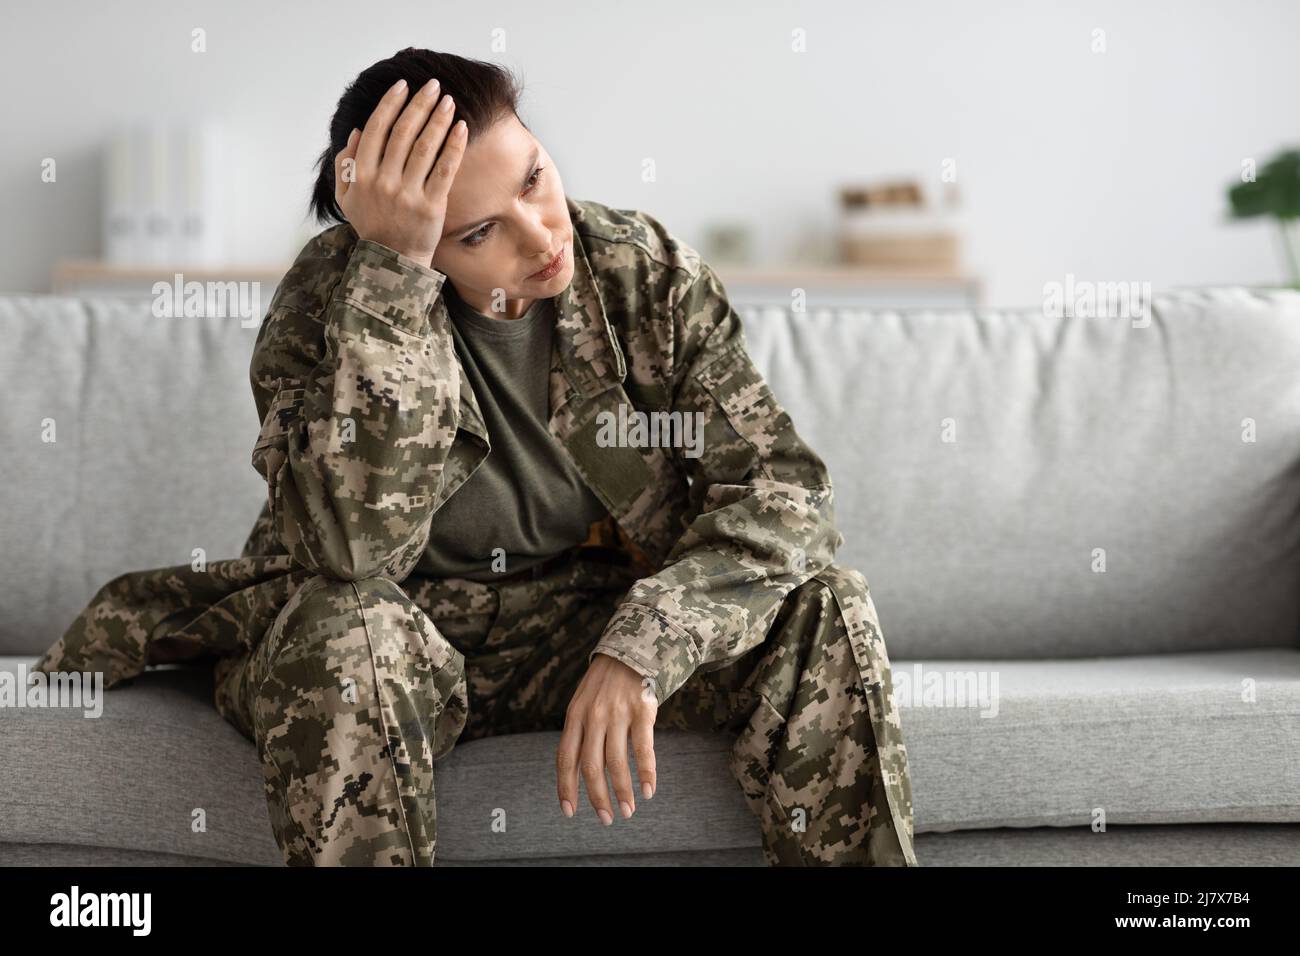 Impact Of Military Service. Depressed Pensive Female Soldier Sitting On Couch Stock Photo